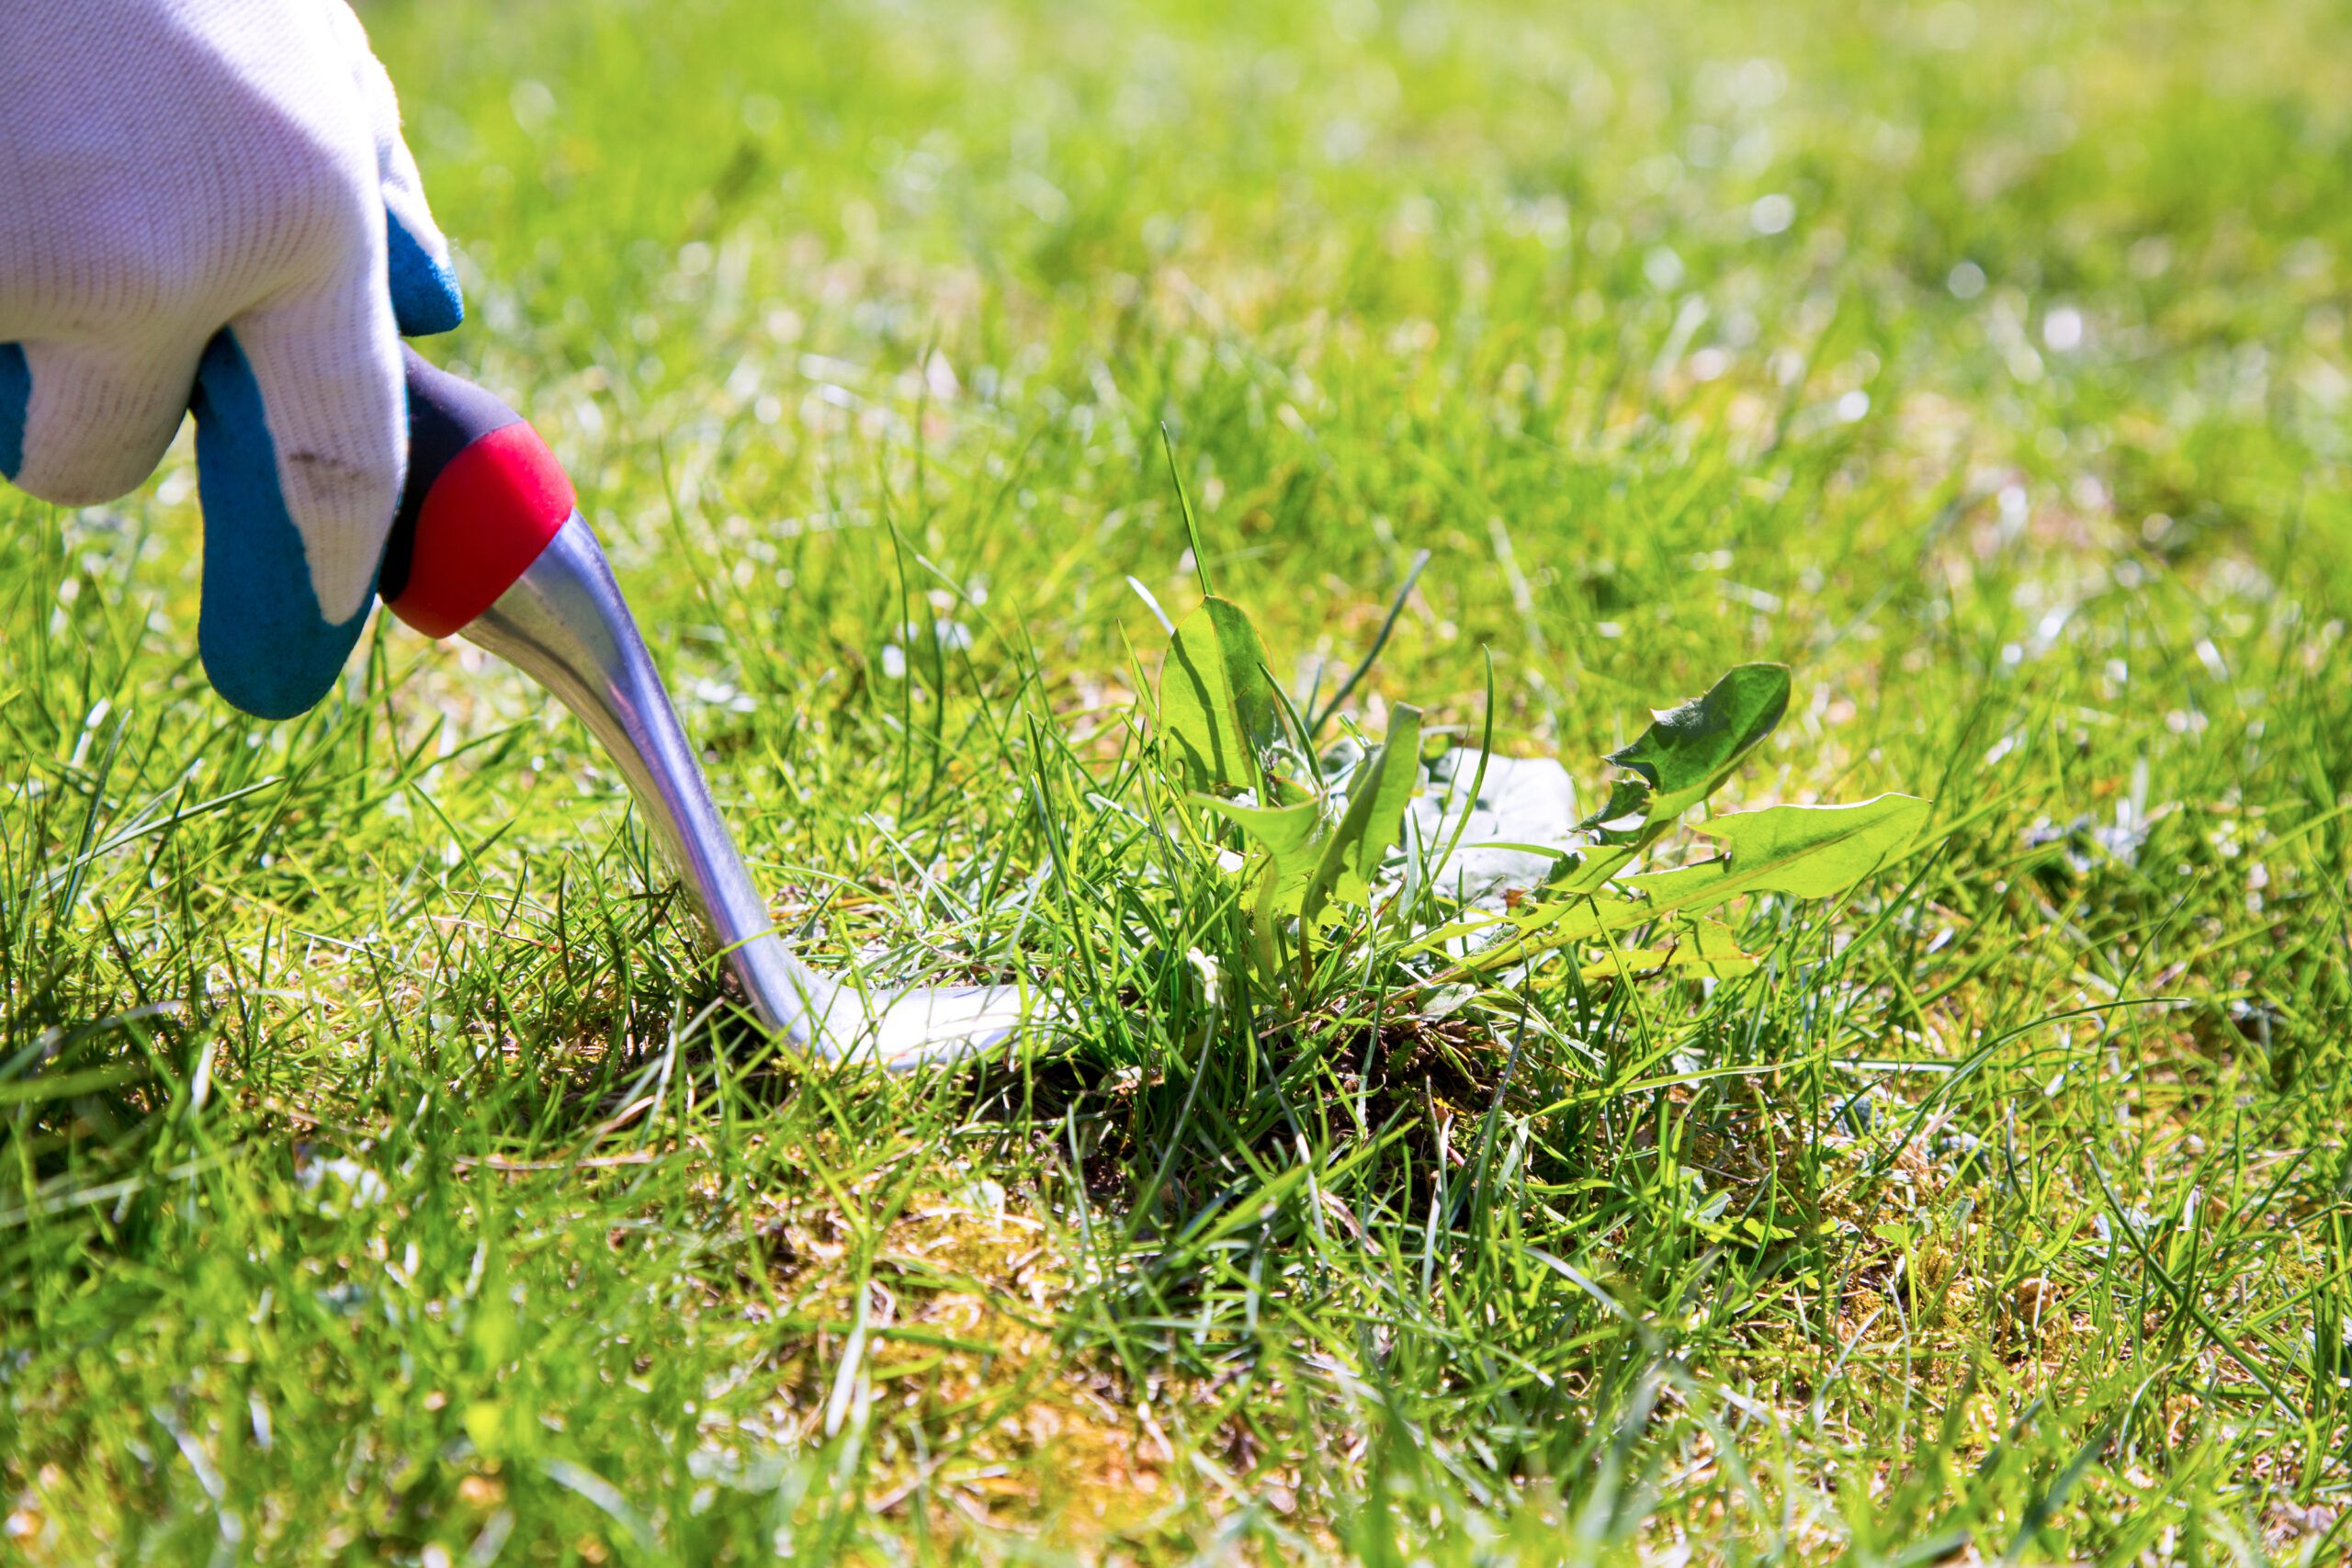 Weed Control Services in Miramar FL